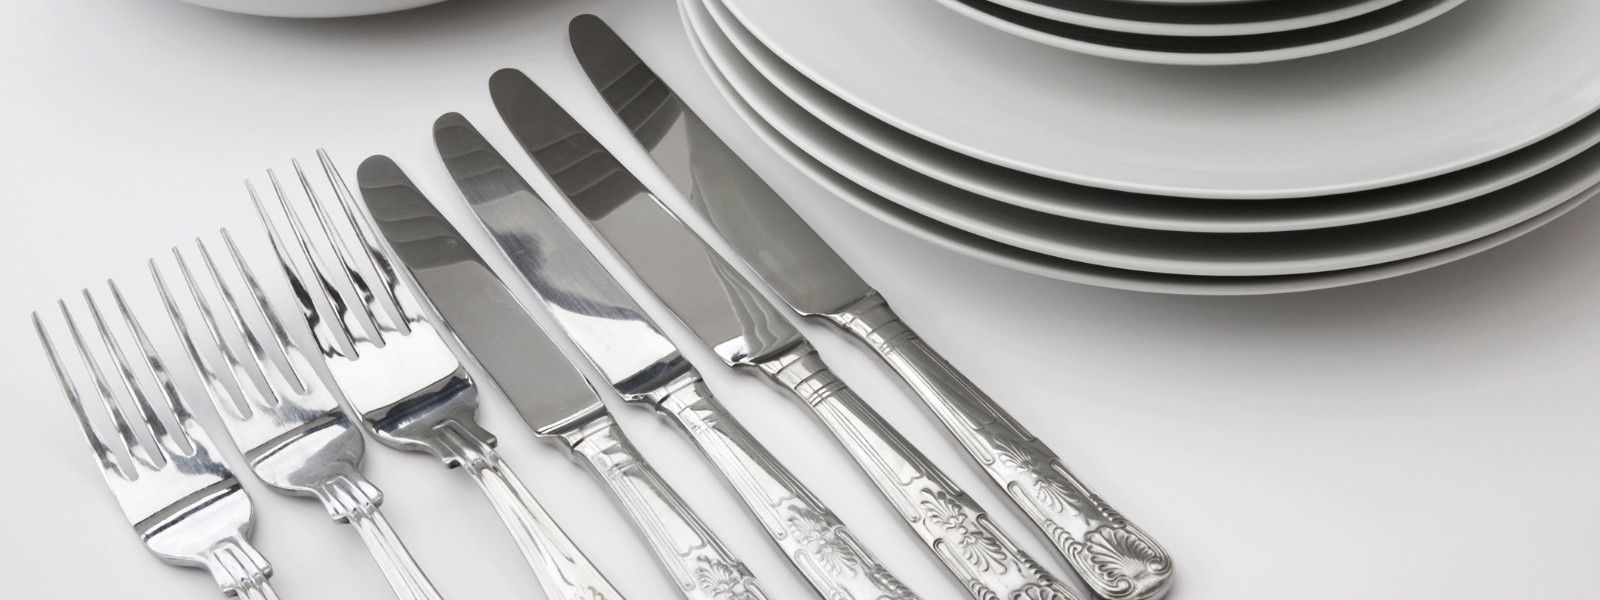 The Cutlery Industry: A Heavy Reliance on Vibrator...